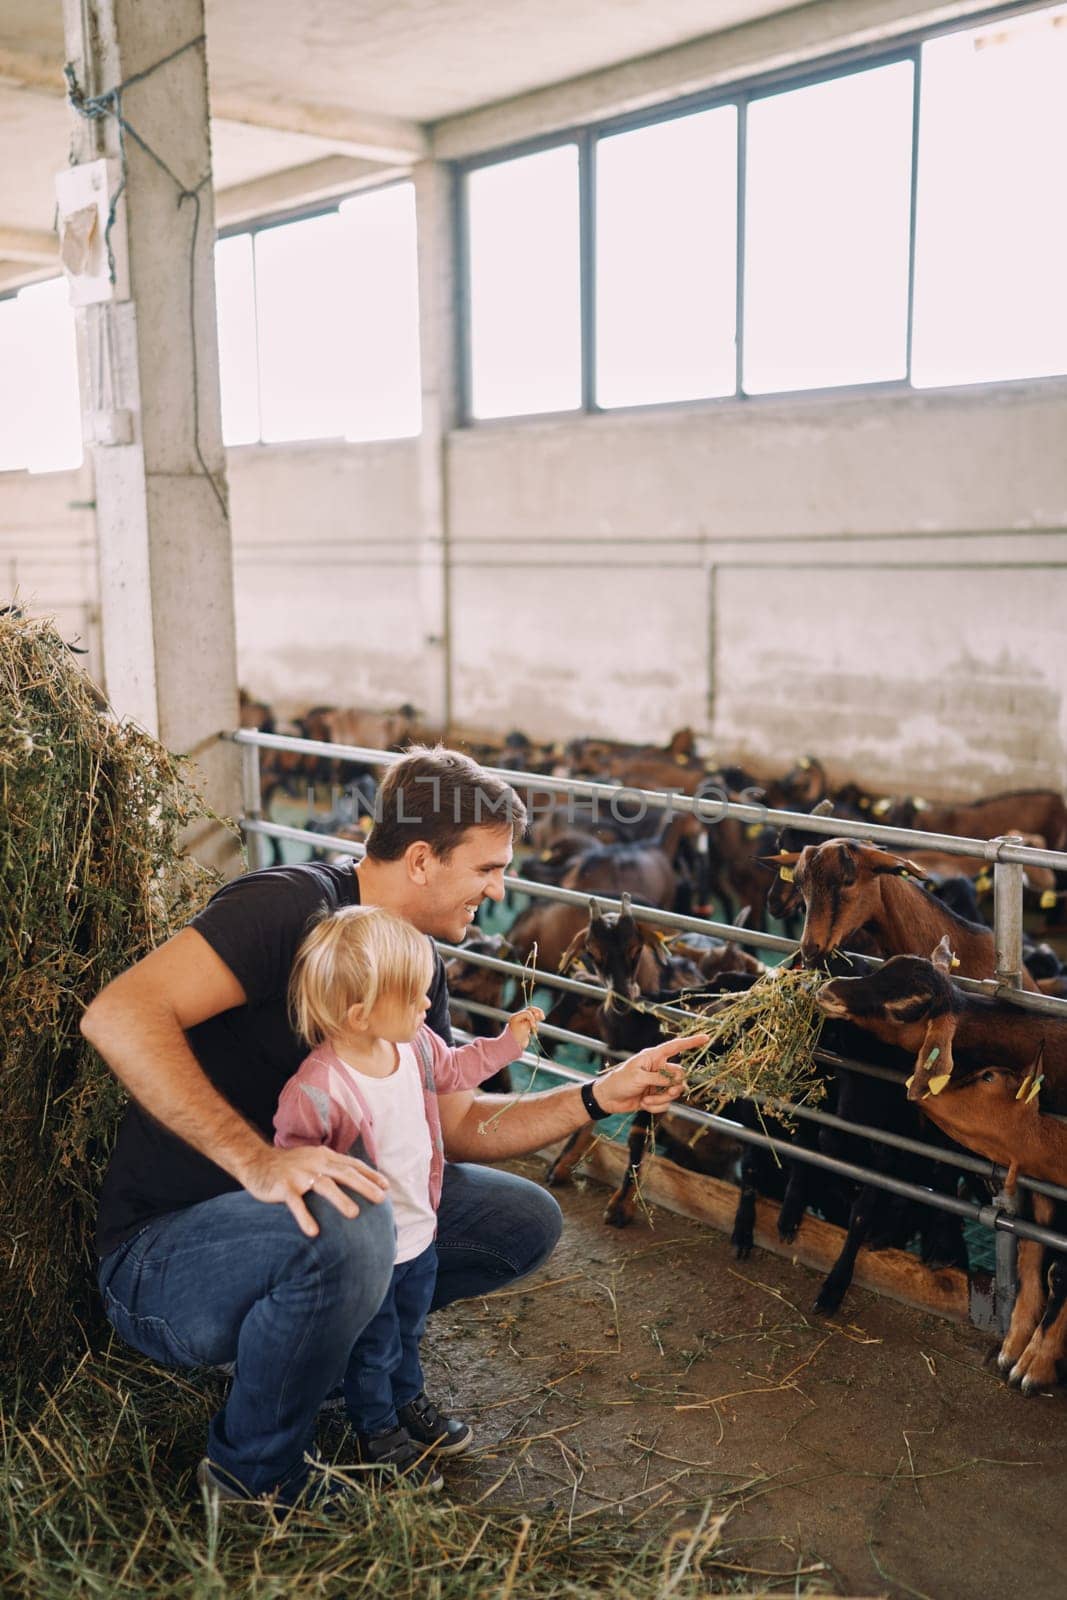 Little girl looks at dad feeding hay to goats in paddock by Nadtochiy